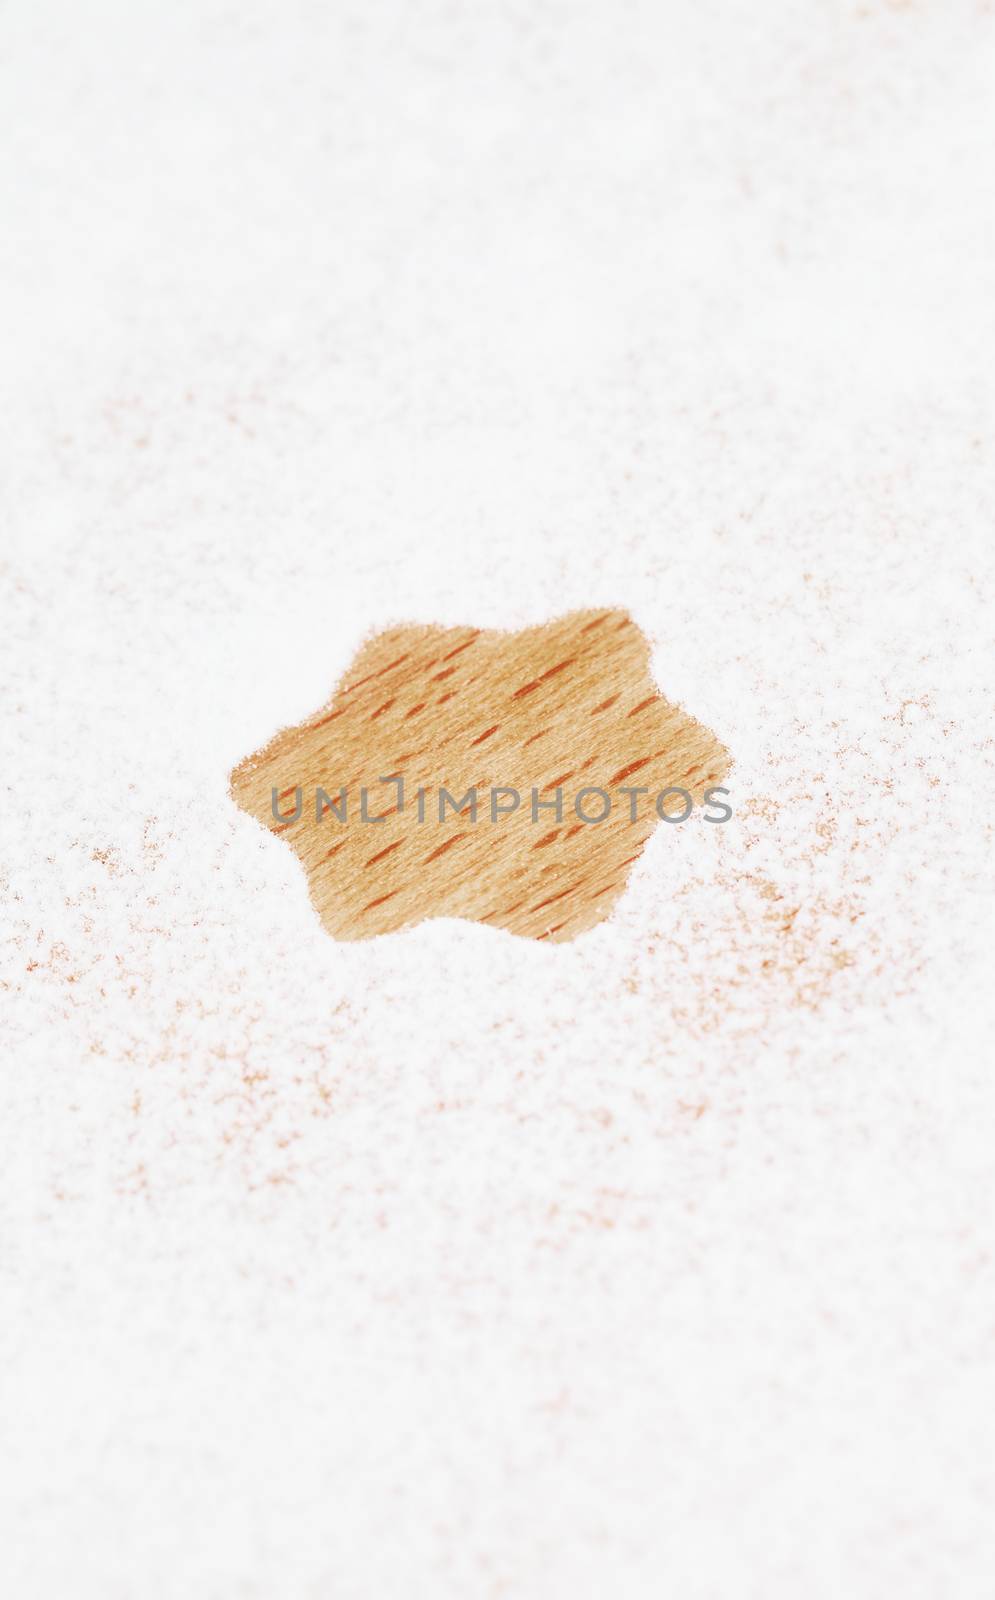 star shape spared out of white flour on wooden background